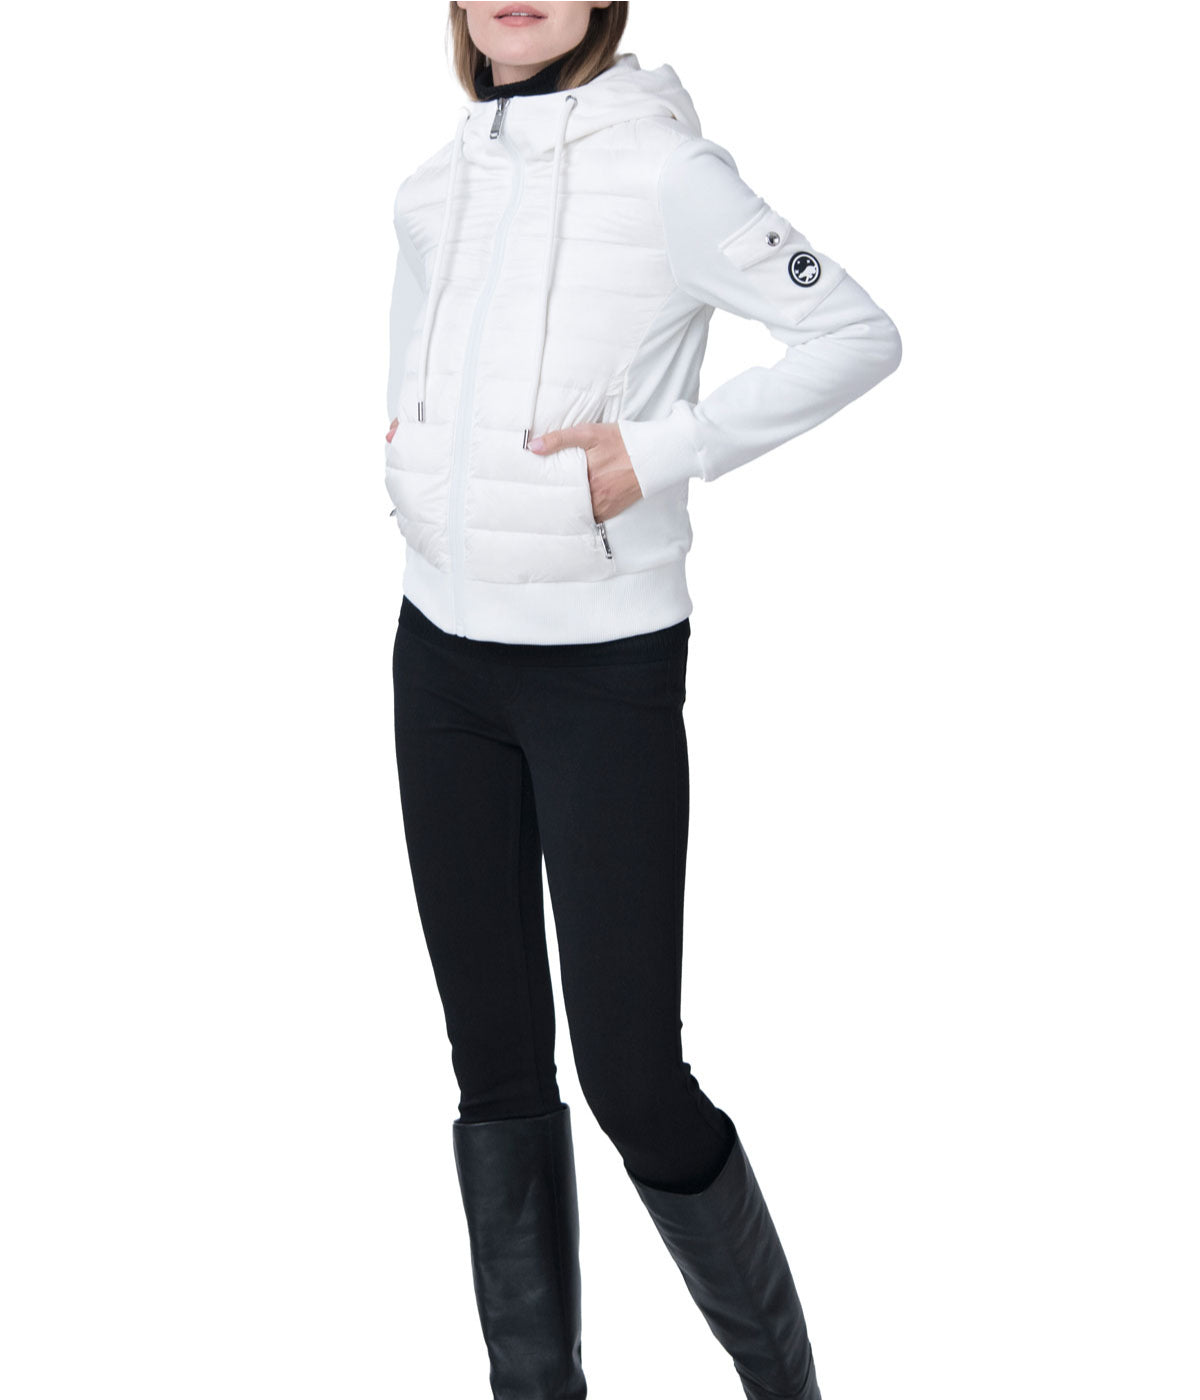 Luna 22" Recycled Nylon And Performance Pique Zip Front Hoodie Jacket White